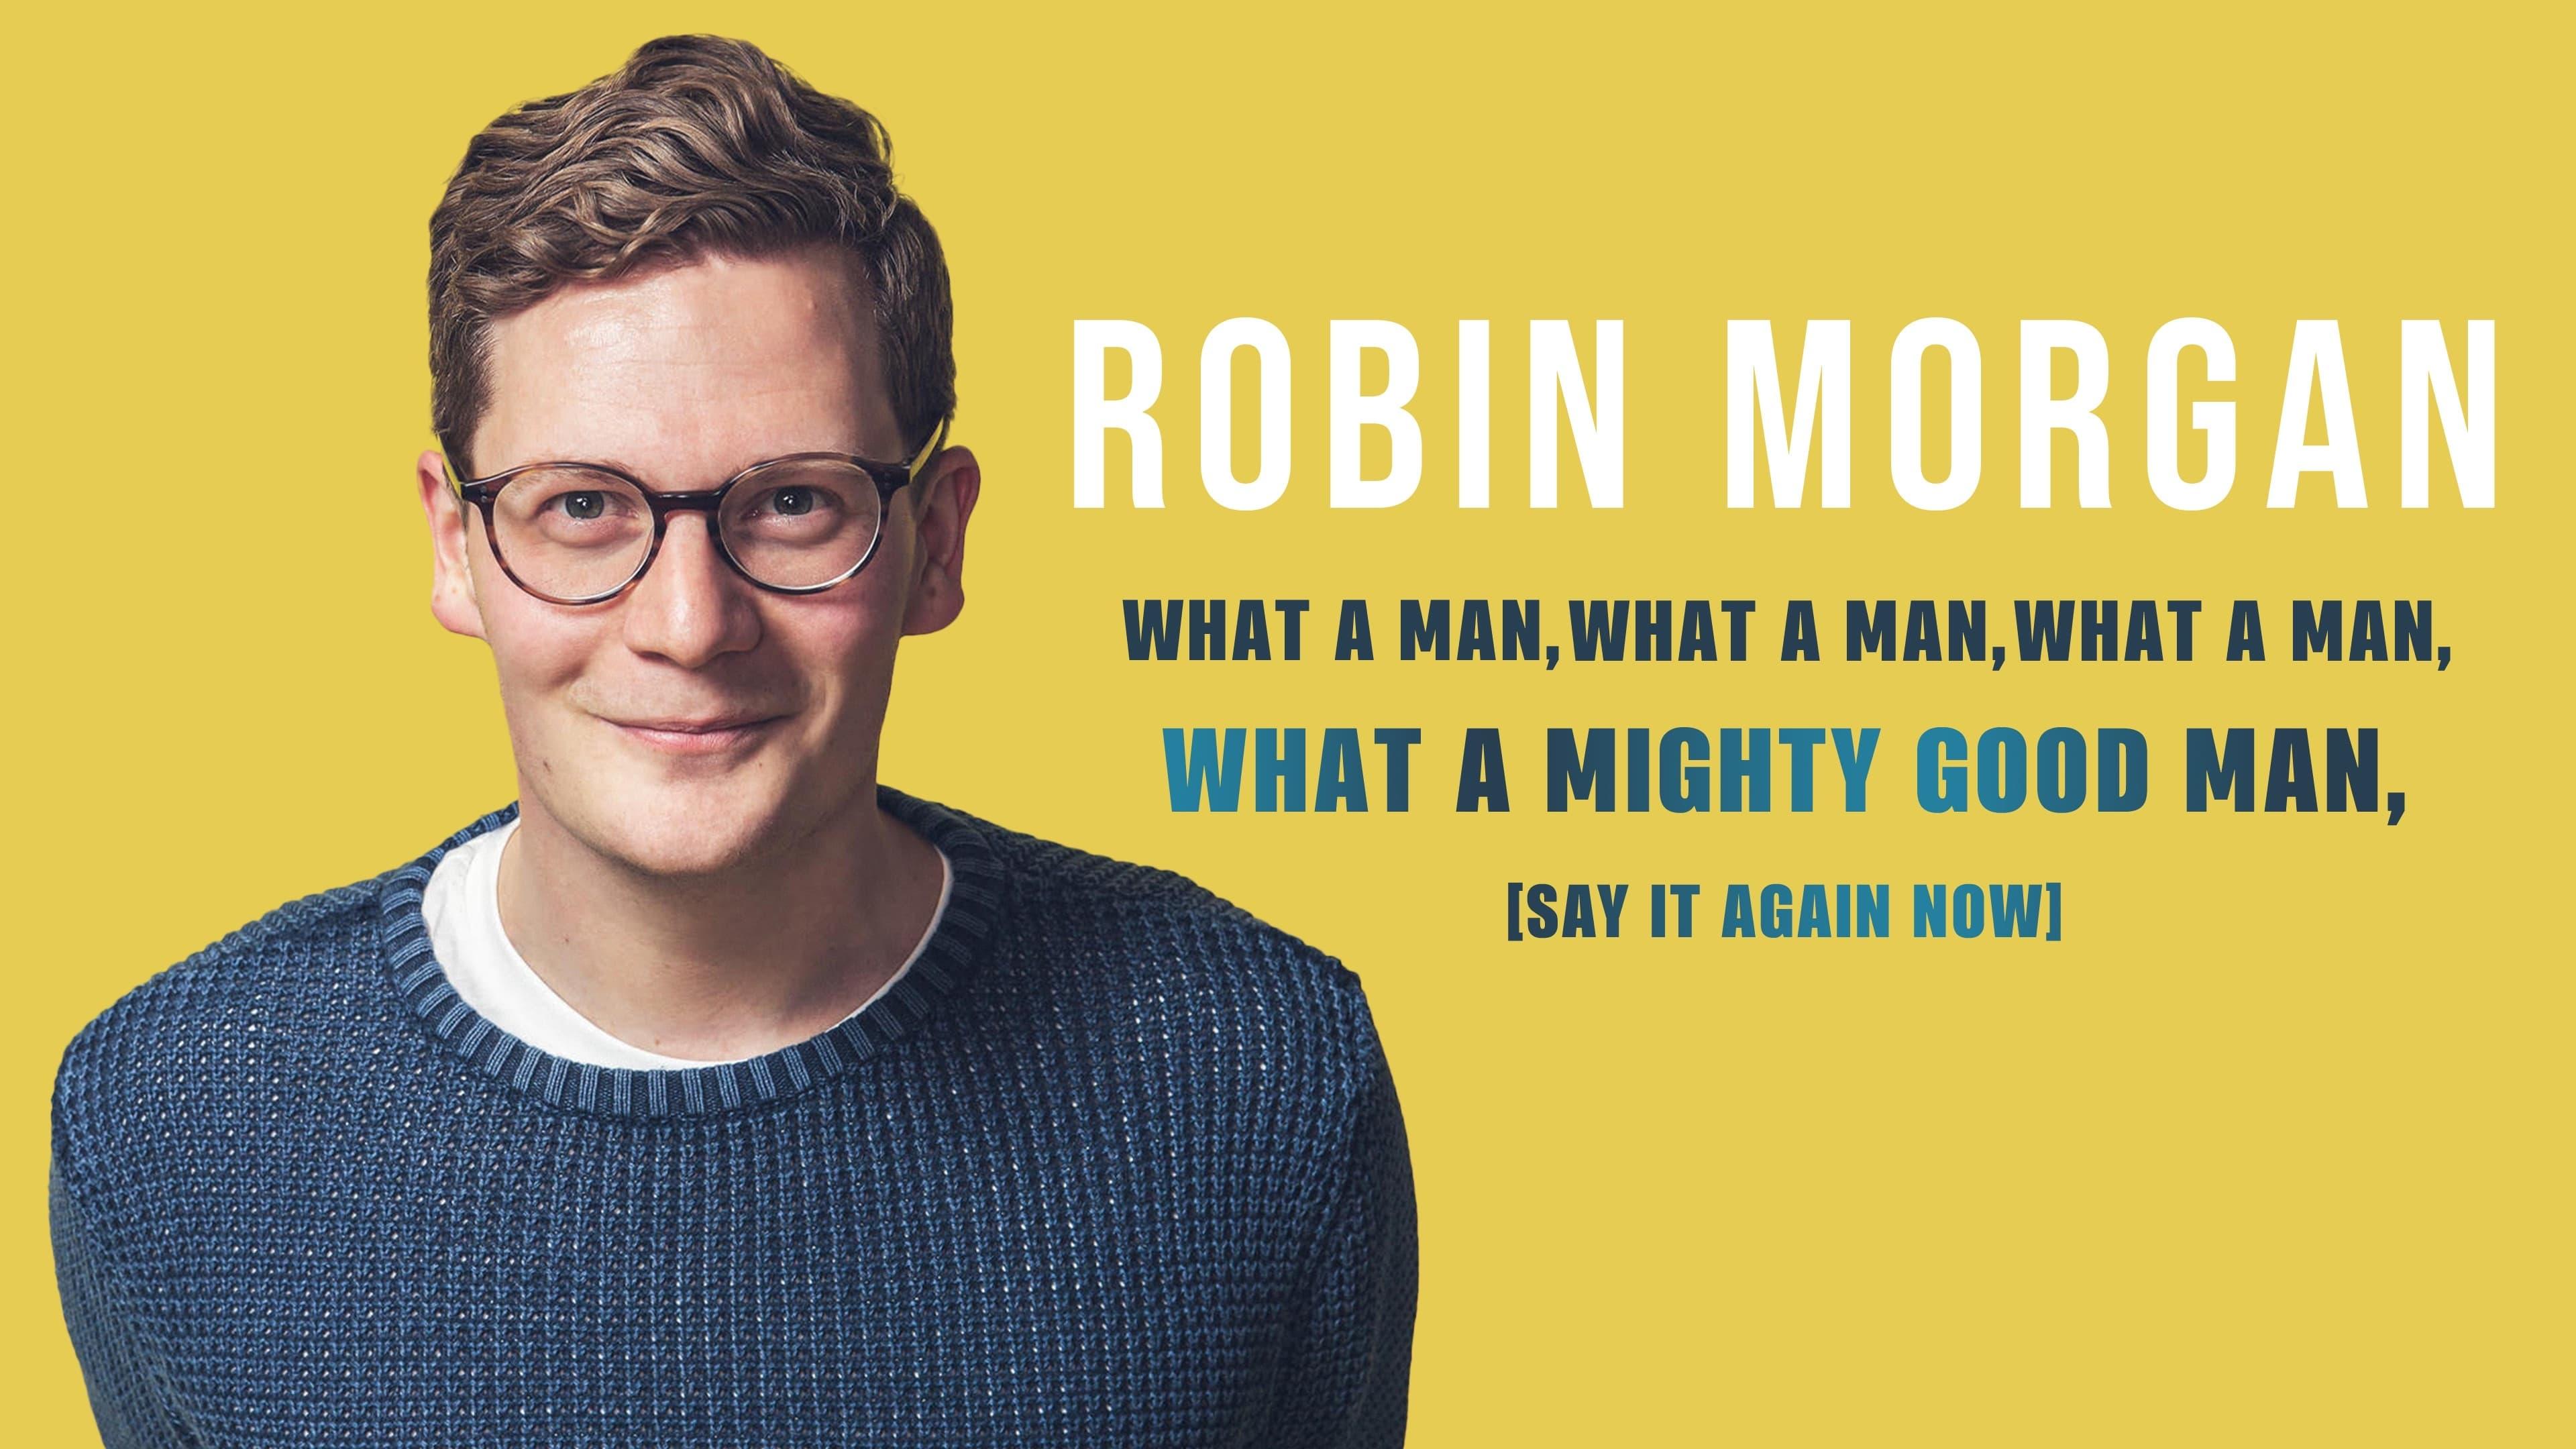 Robin Morgan: What a Man, What a Man, What a Man, What a Mighty Good Man (Say It Again Now) backdrop